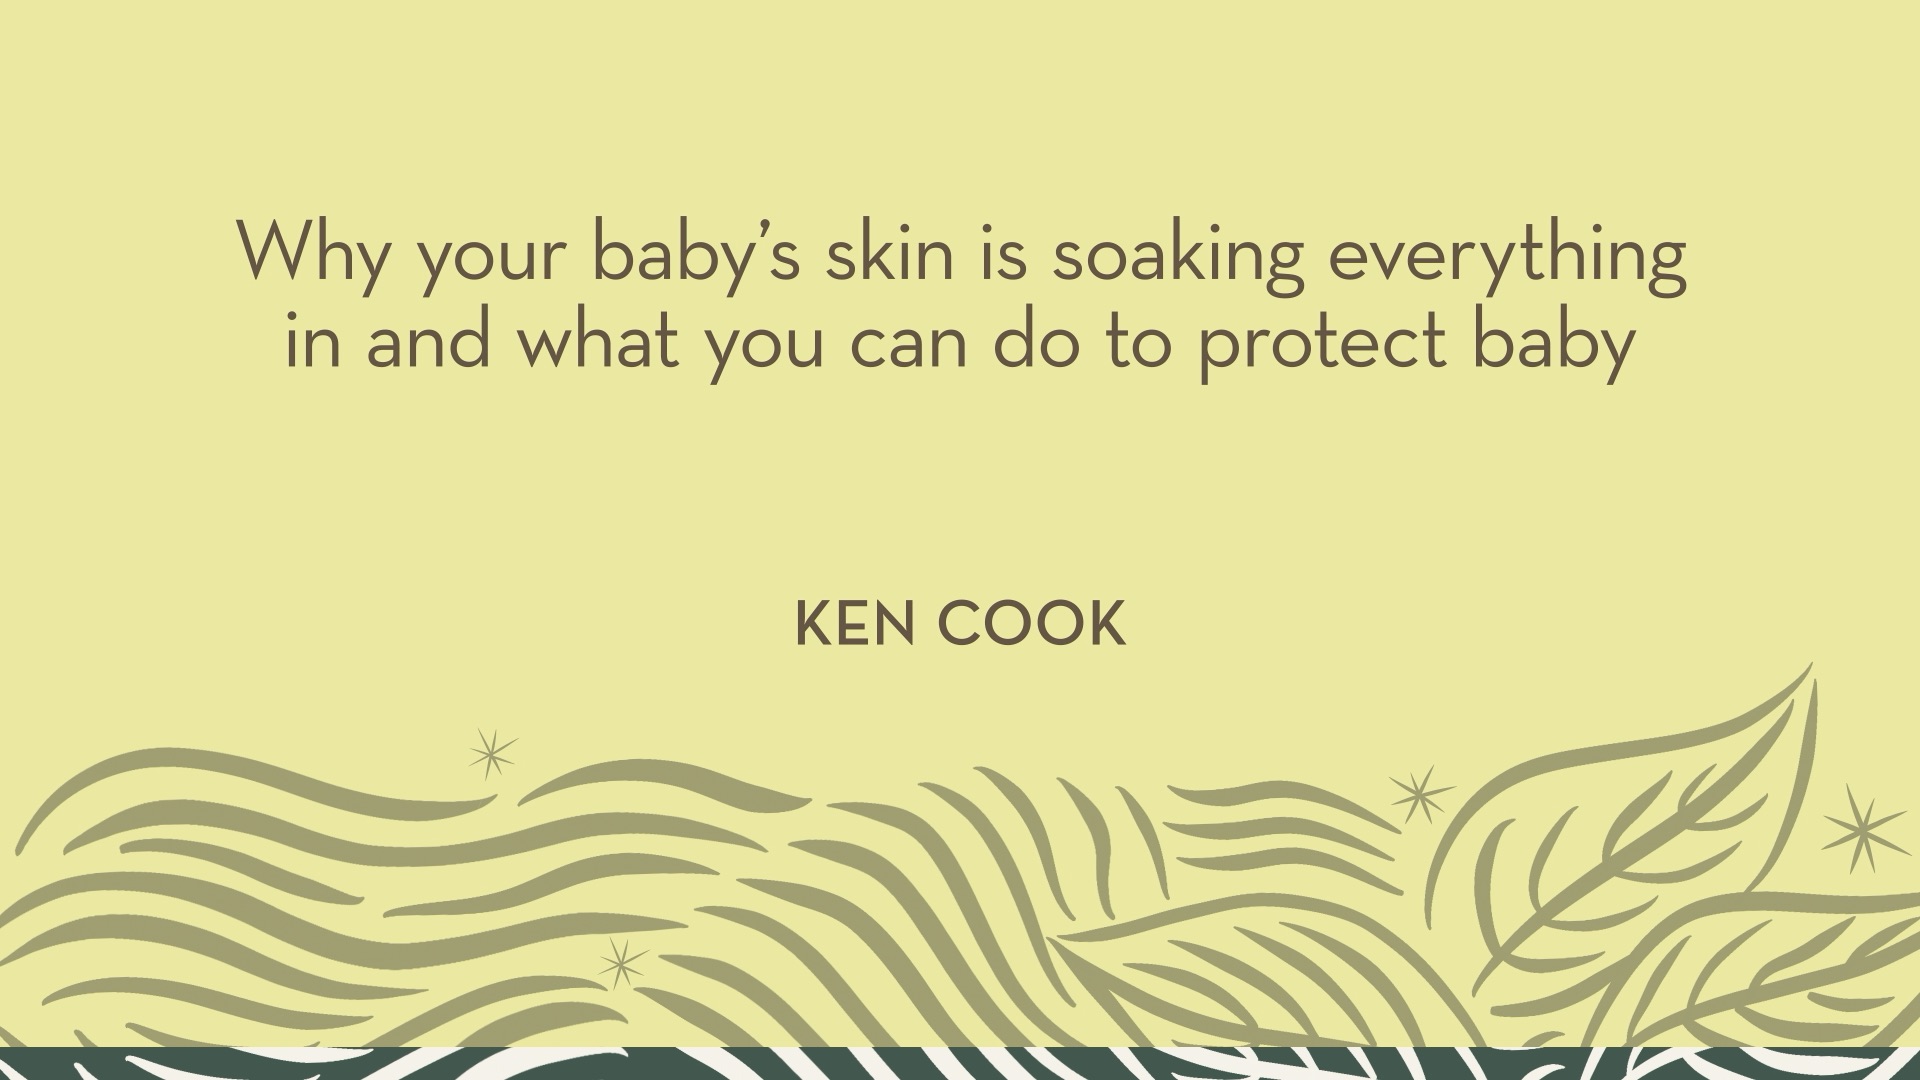 Ken Cook | Why your baby's skin is soaking everything in and what you can do to protect baby